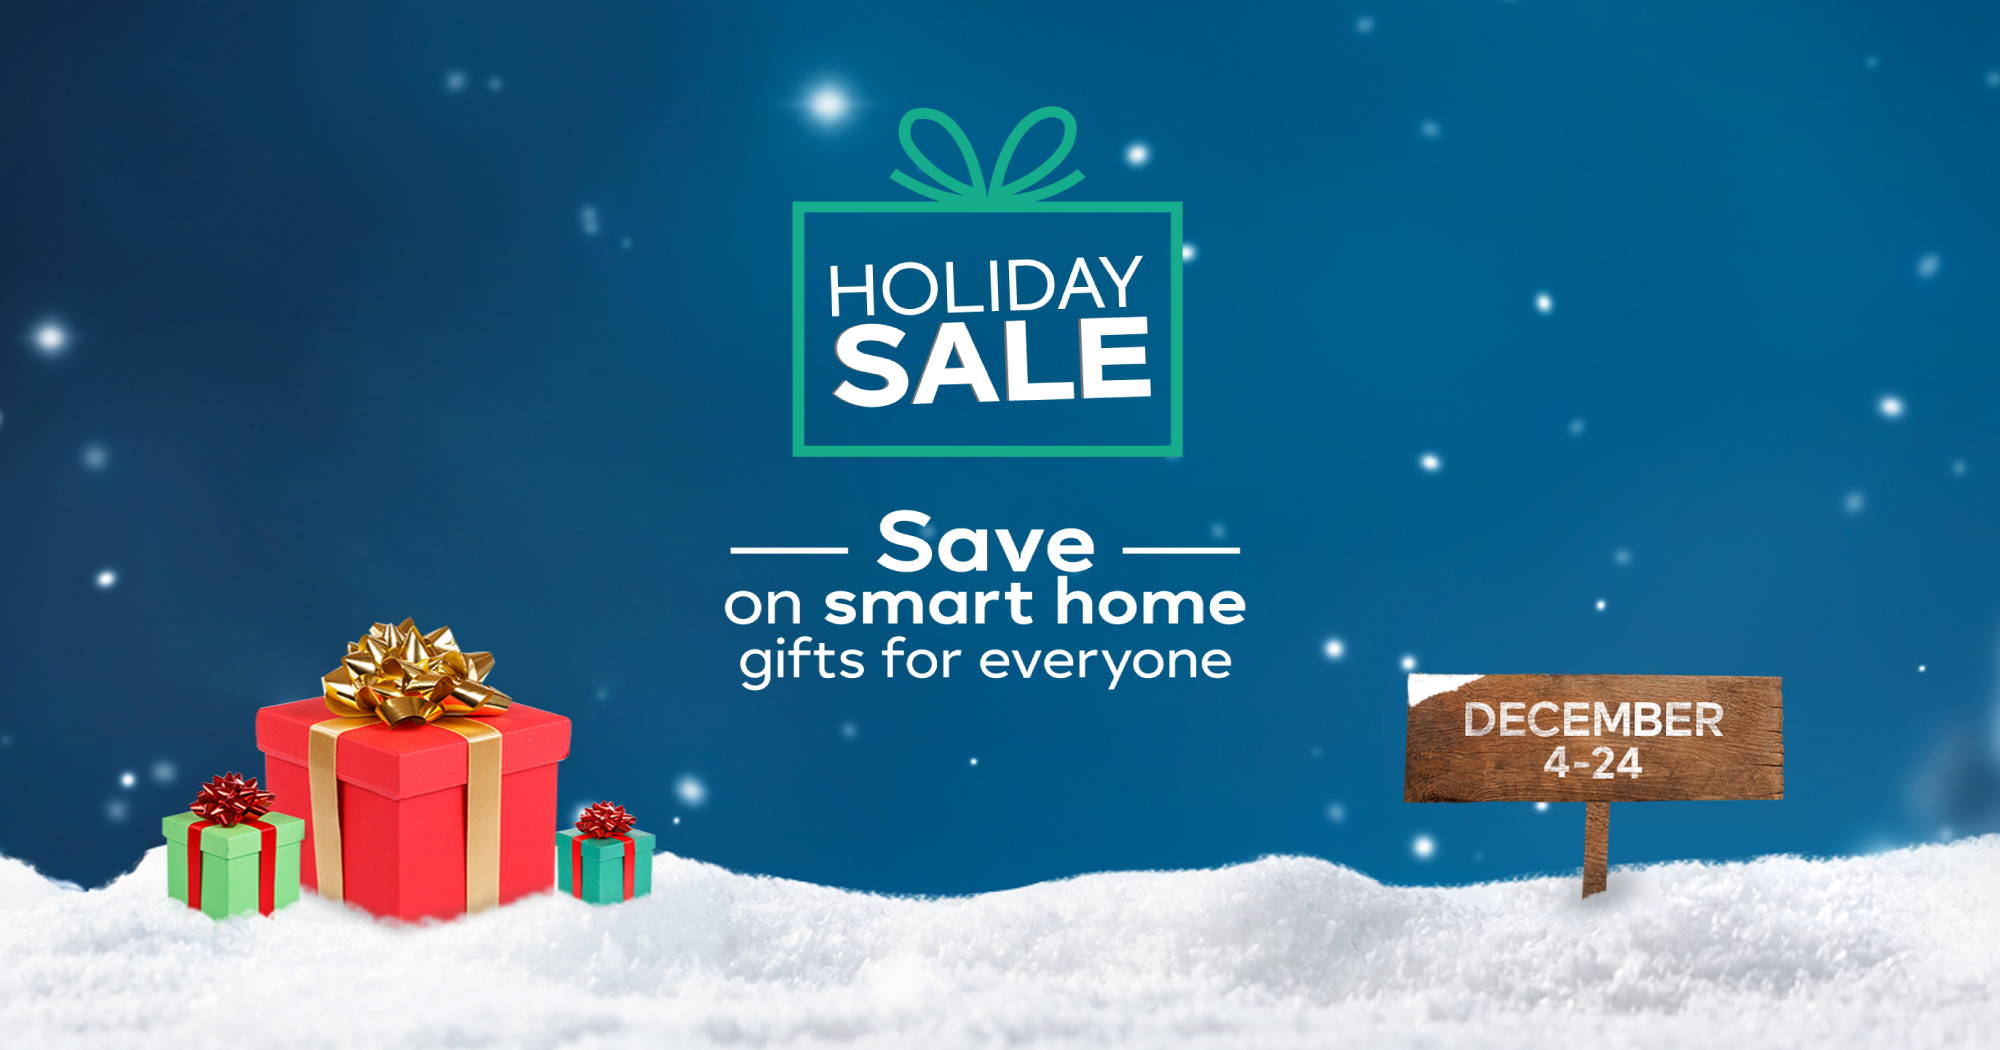 Smart Home Holiday Deals Holiday sale